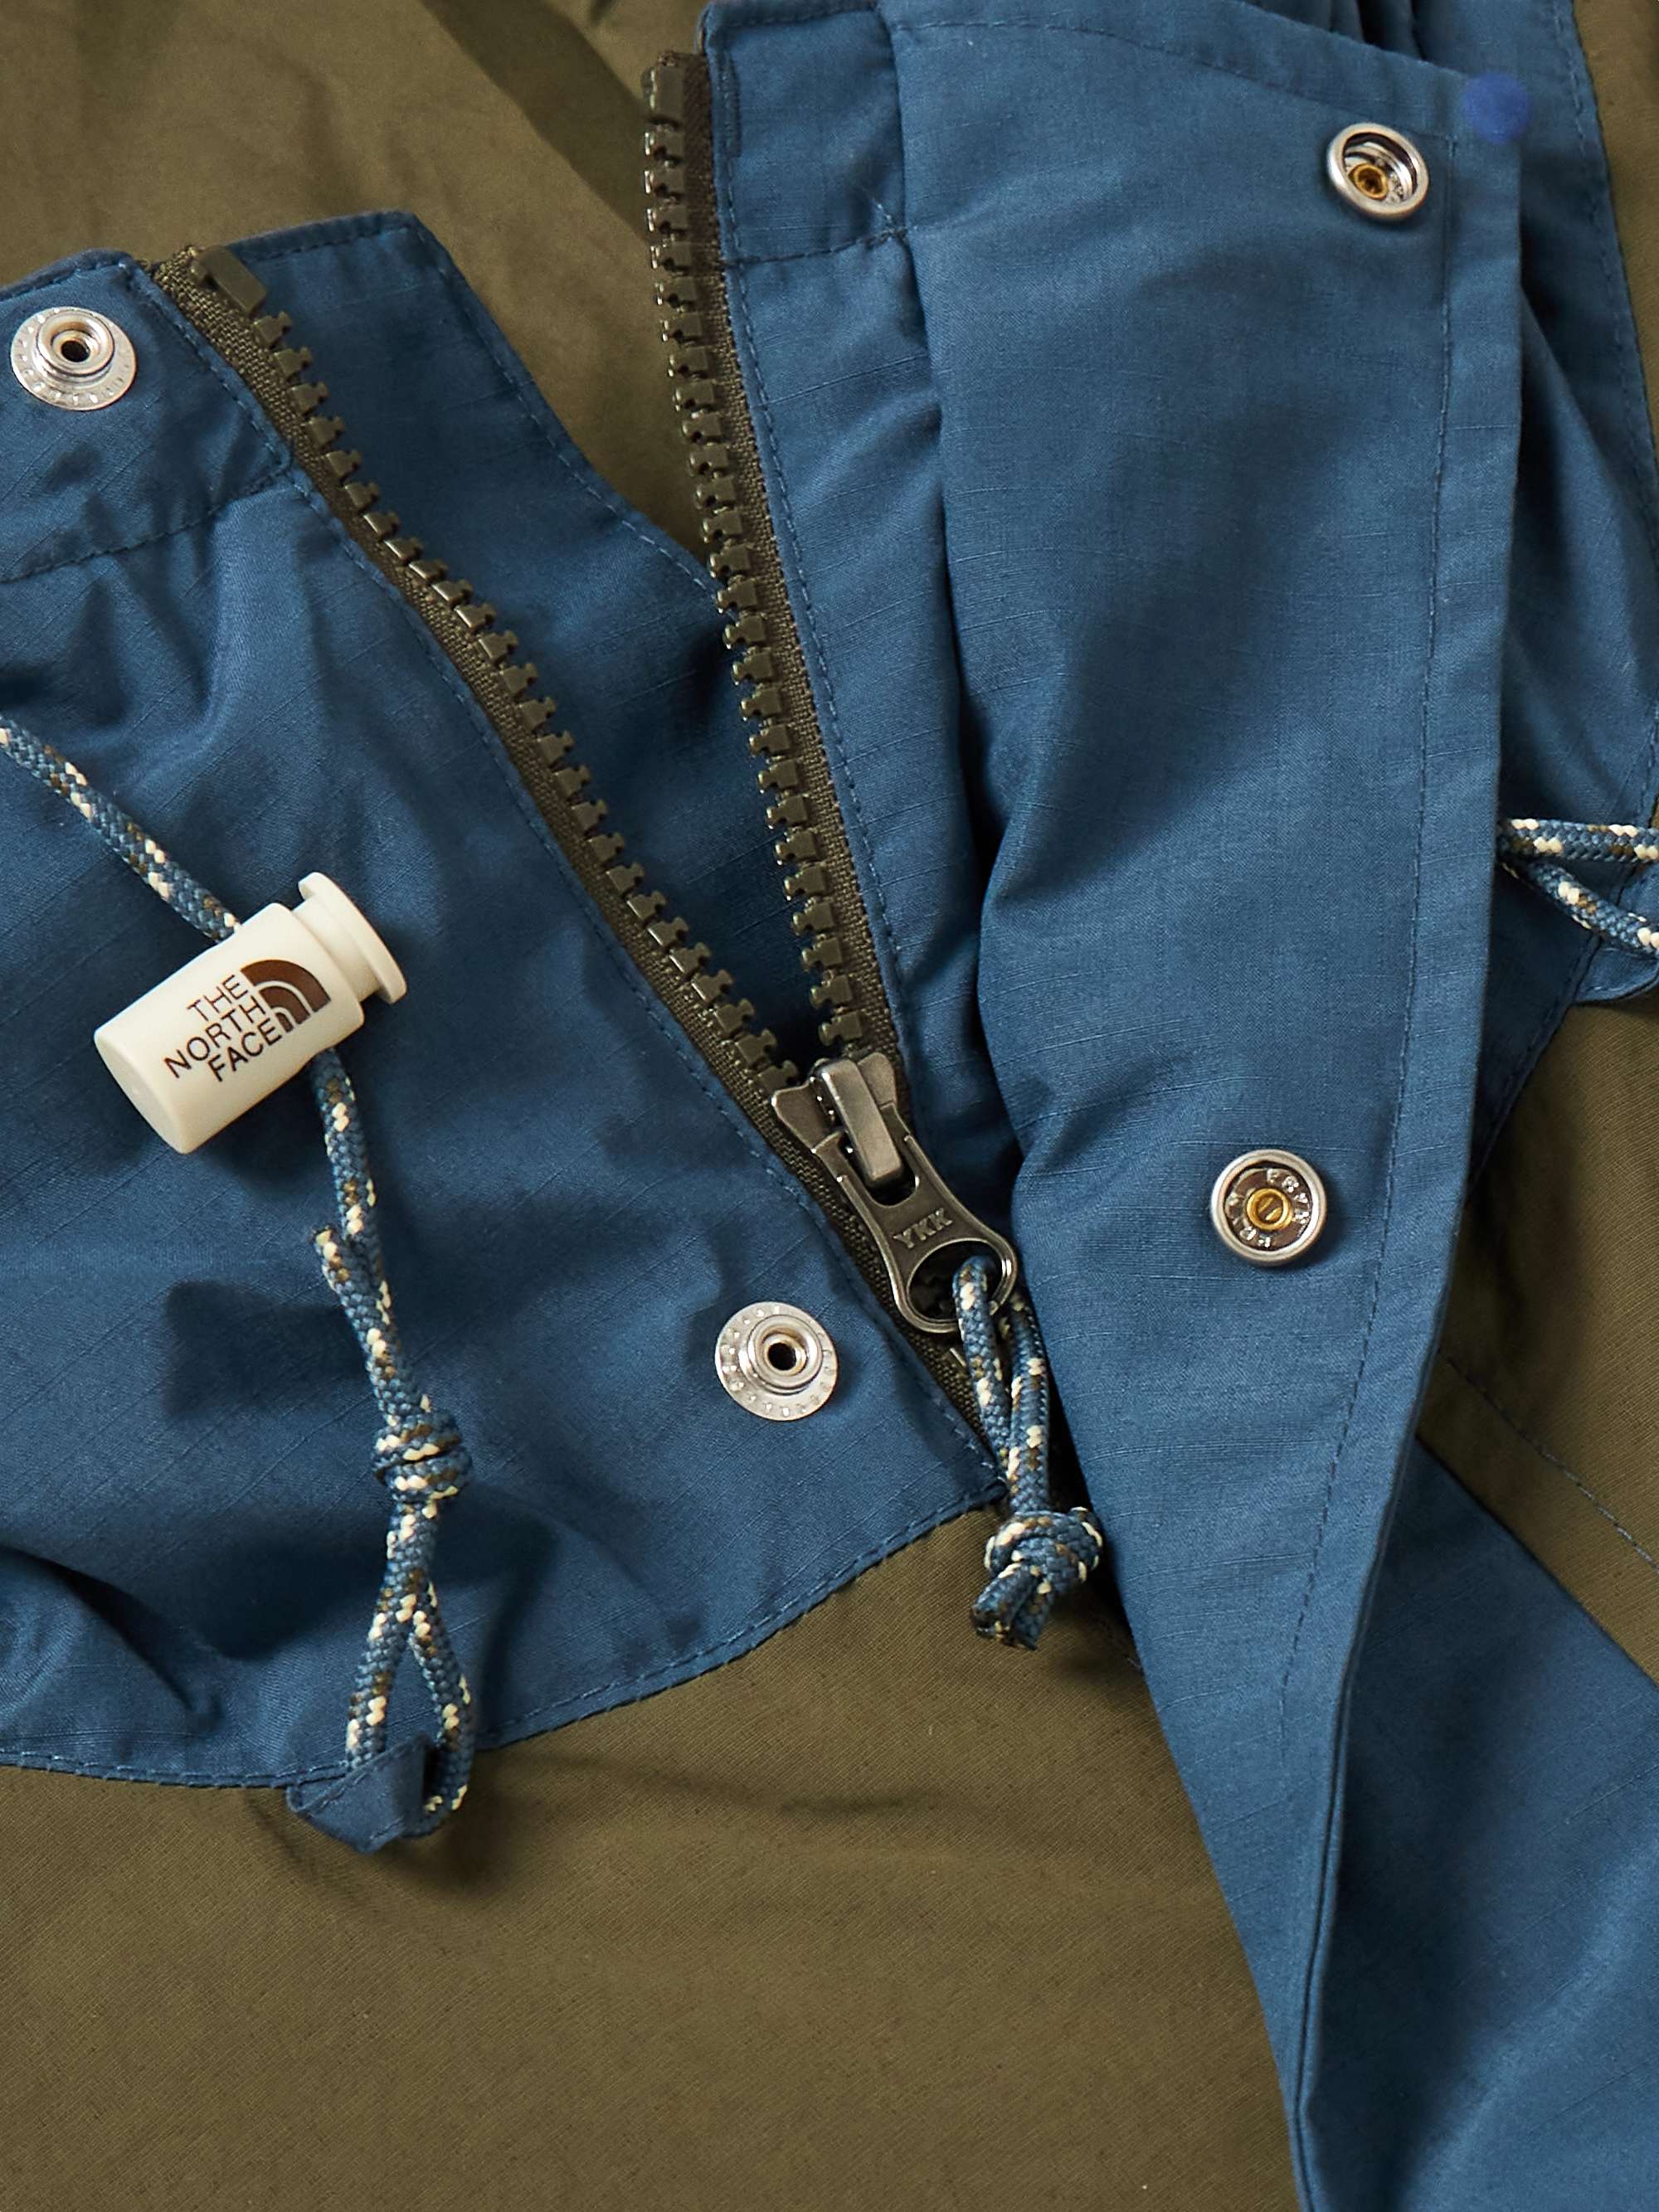 THE NORTH FACE 86 Low-Fi Hi-Tek Mountain Shell Hooded Jacket